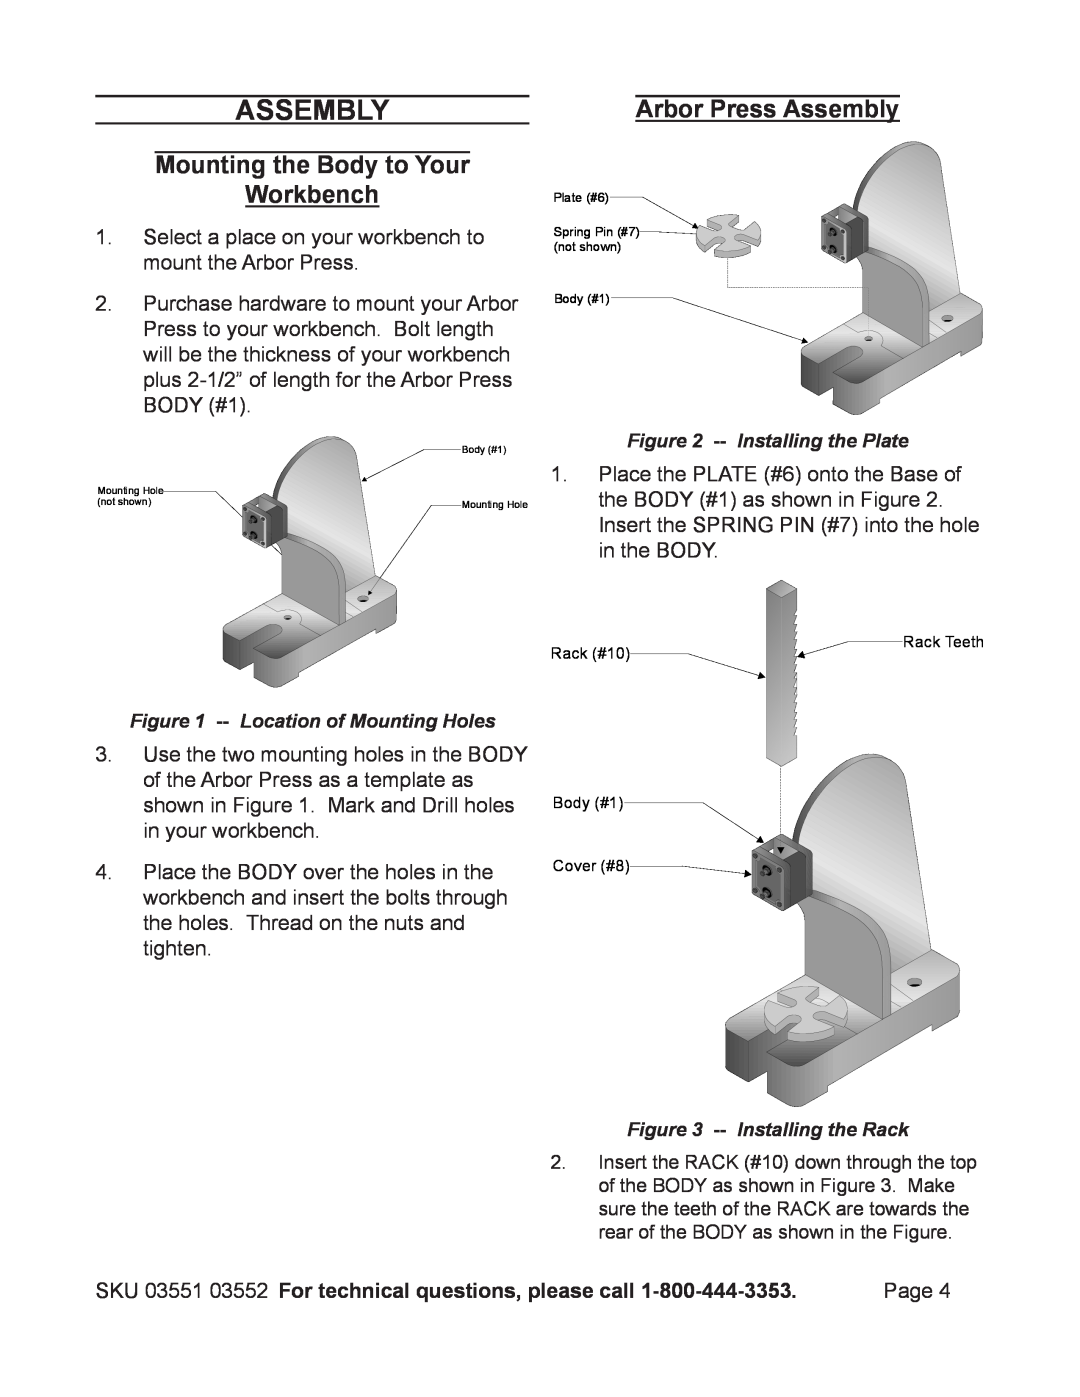 Harbor Freight Tools 3552, 3551 operating instructions Mounting the Body to Your Workbench, Arbor Press Assembly 